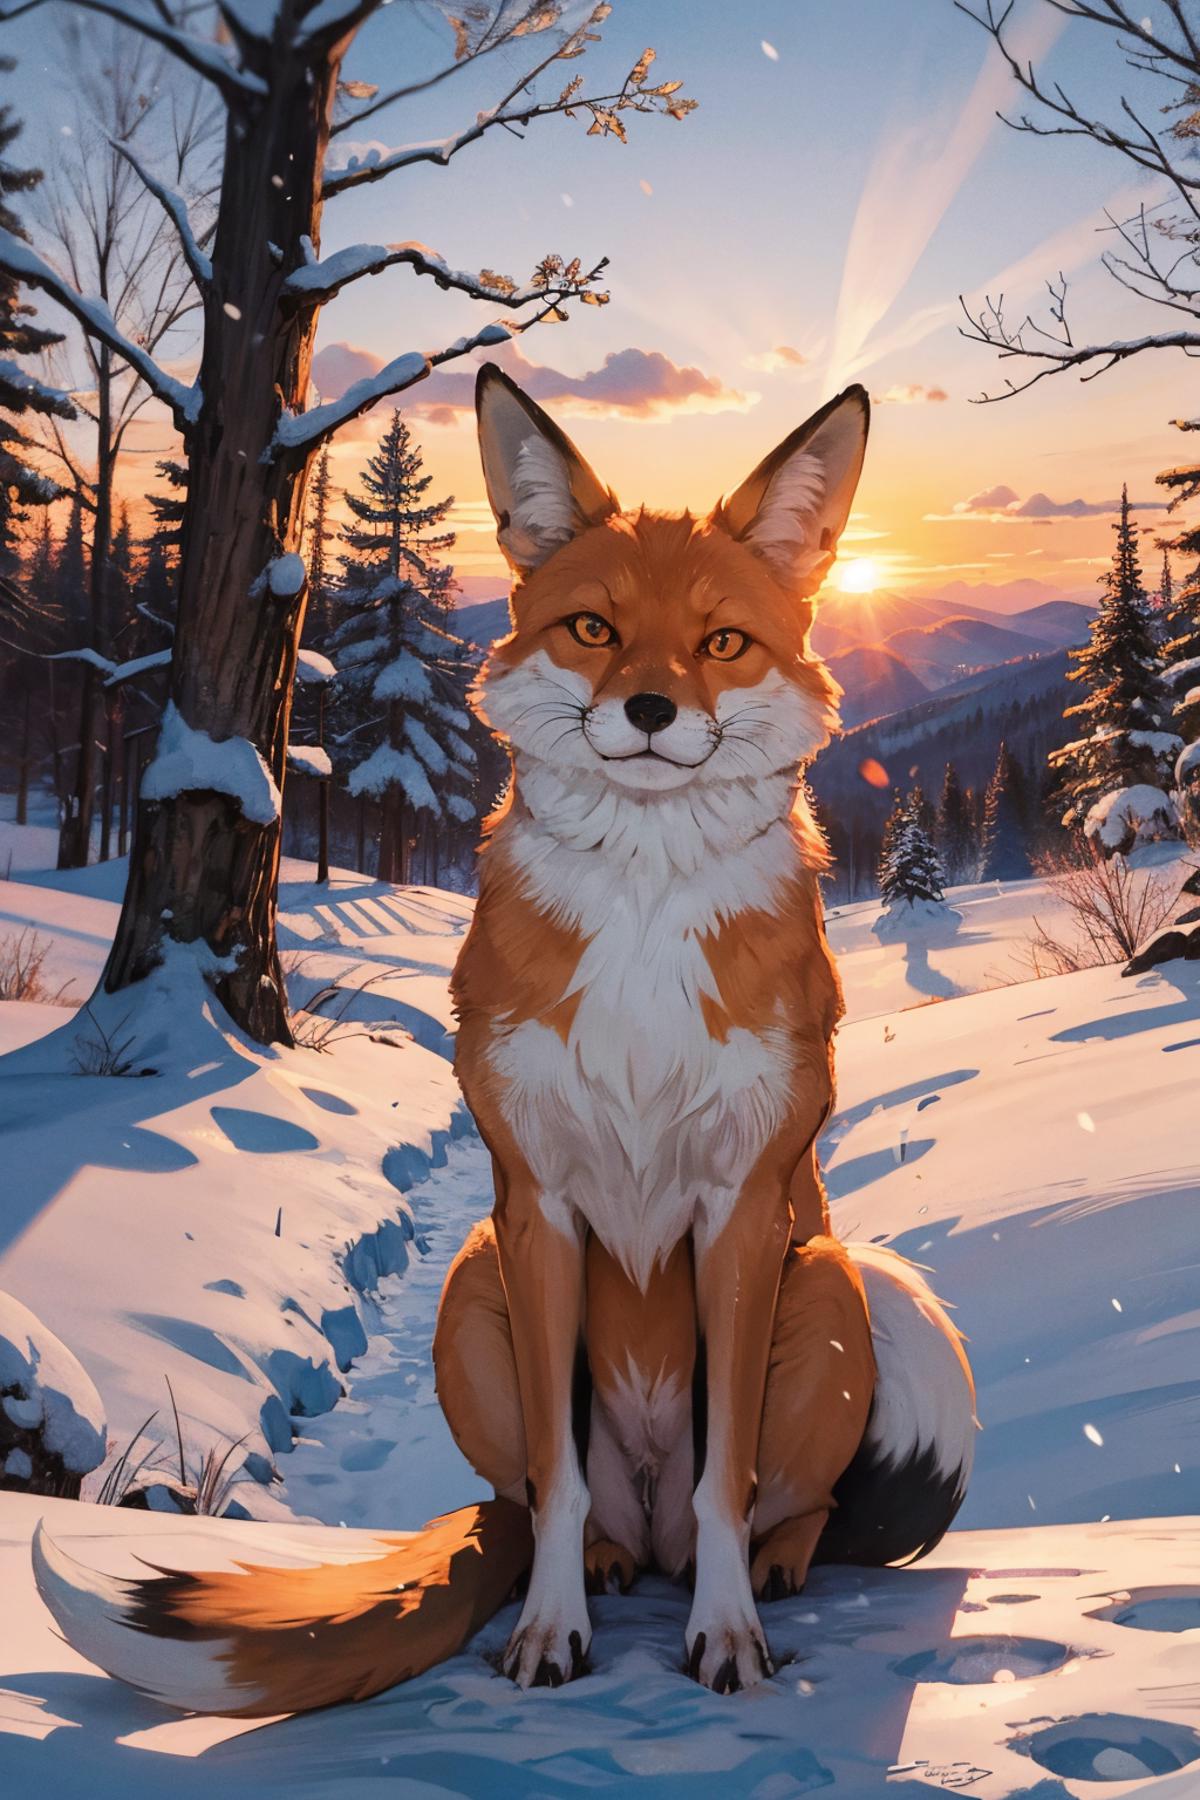 A fox sitting in the snow at sunset.